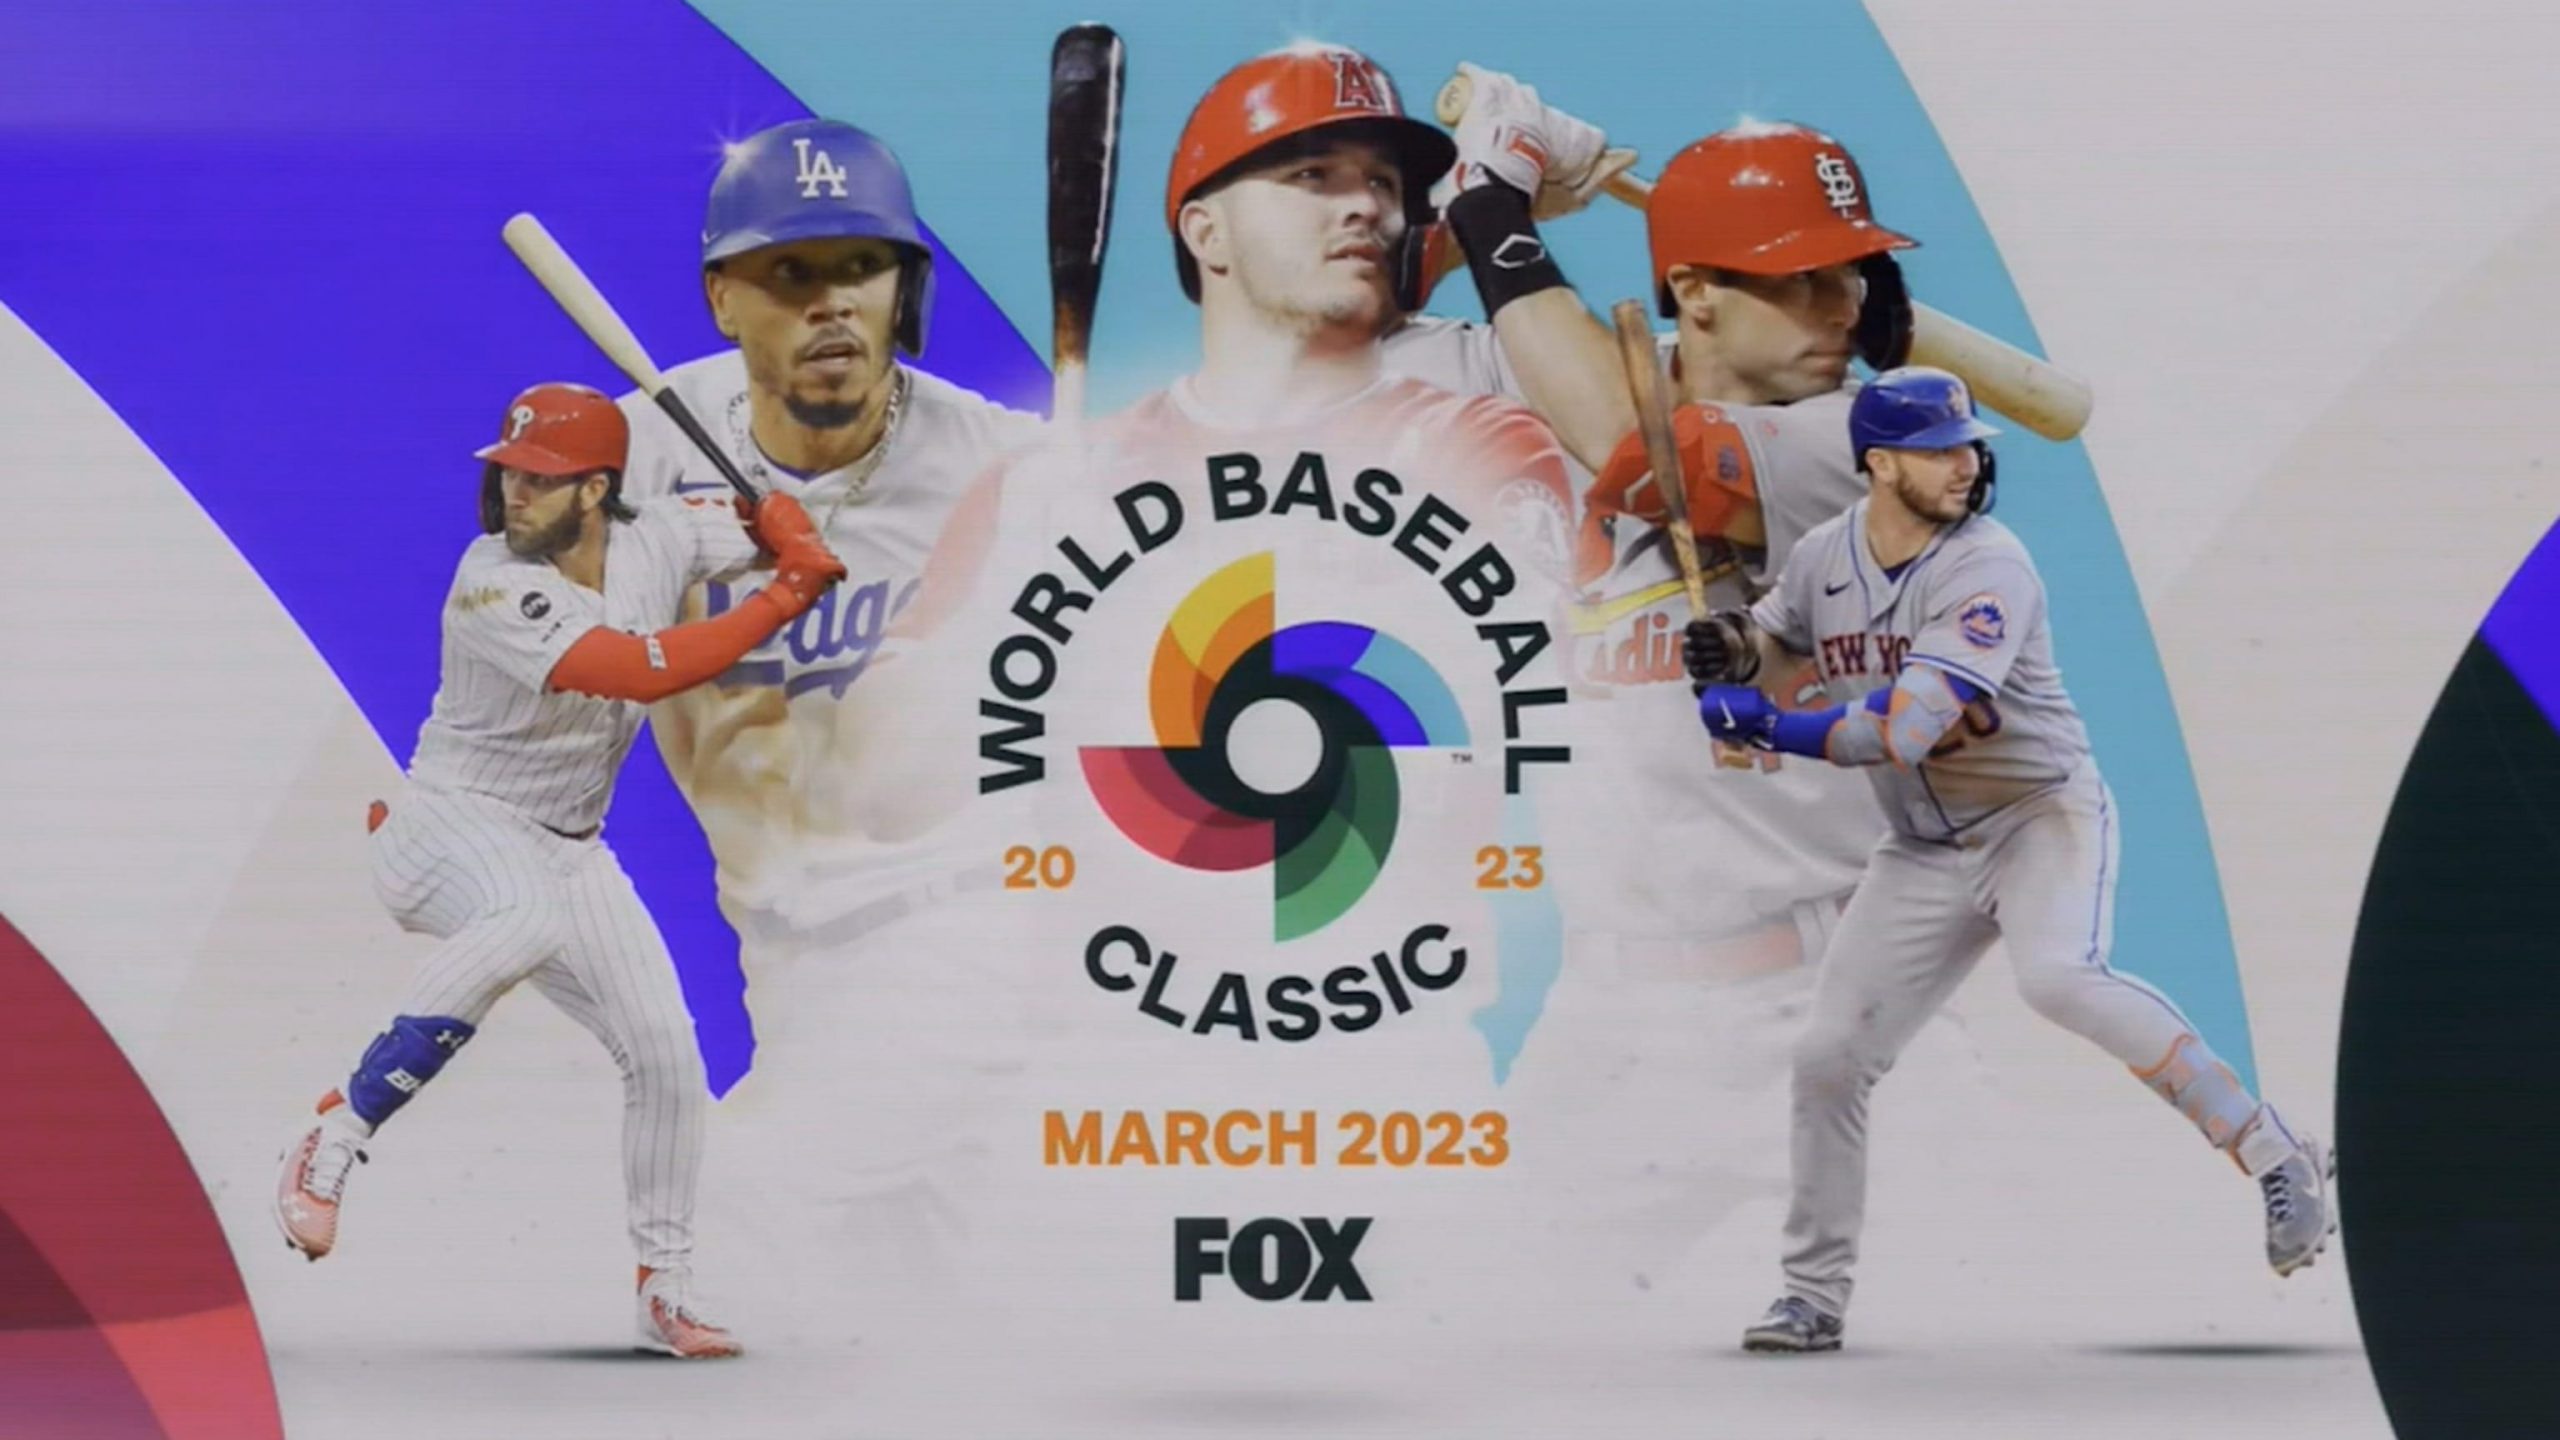 Team USA looks to defend 2017 title in the World Baseball Classic